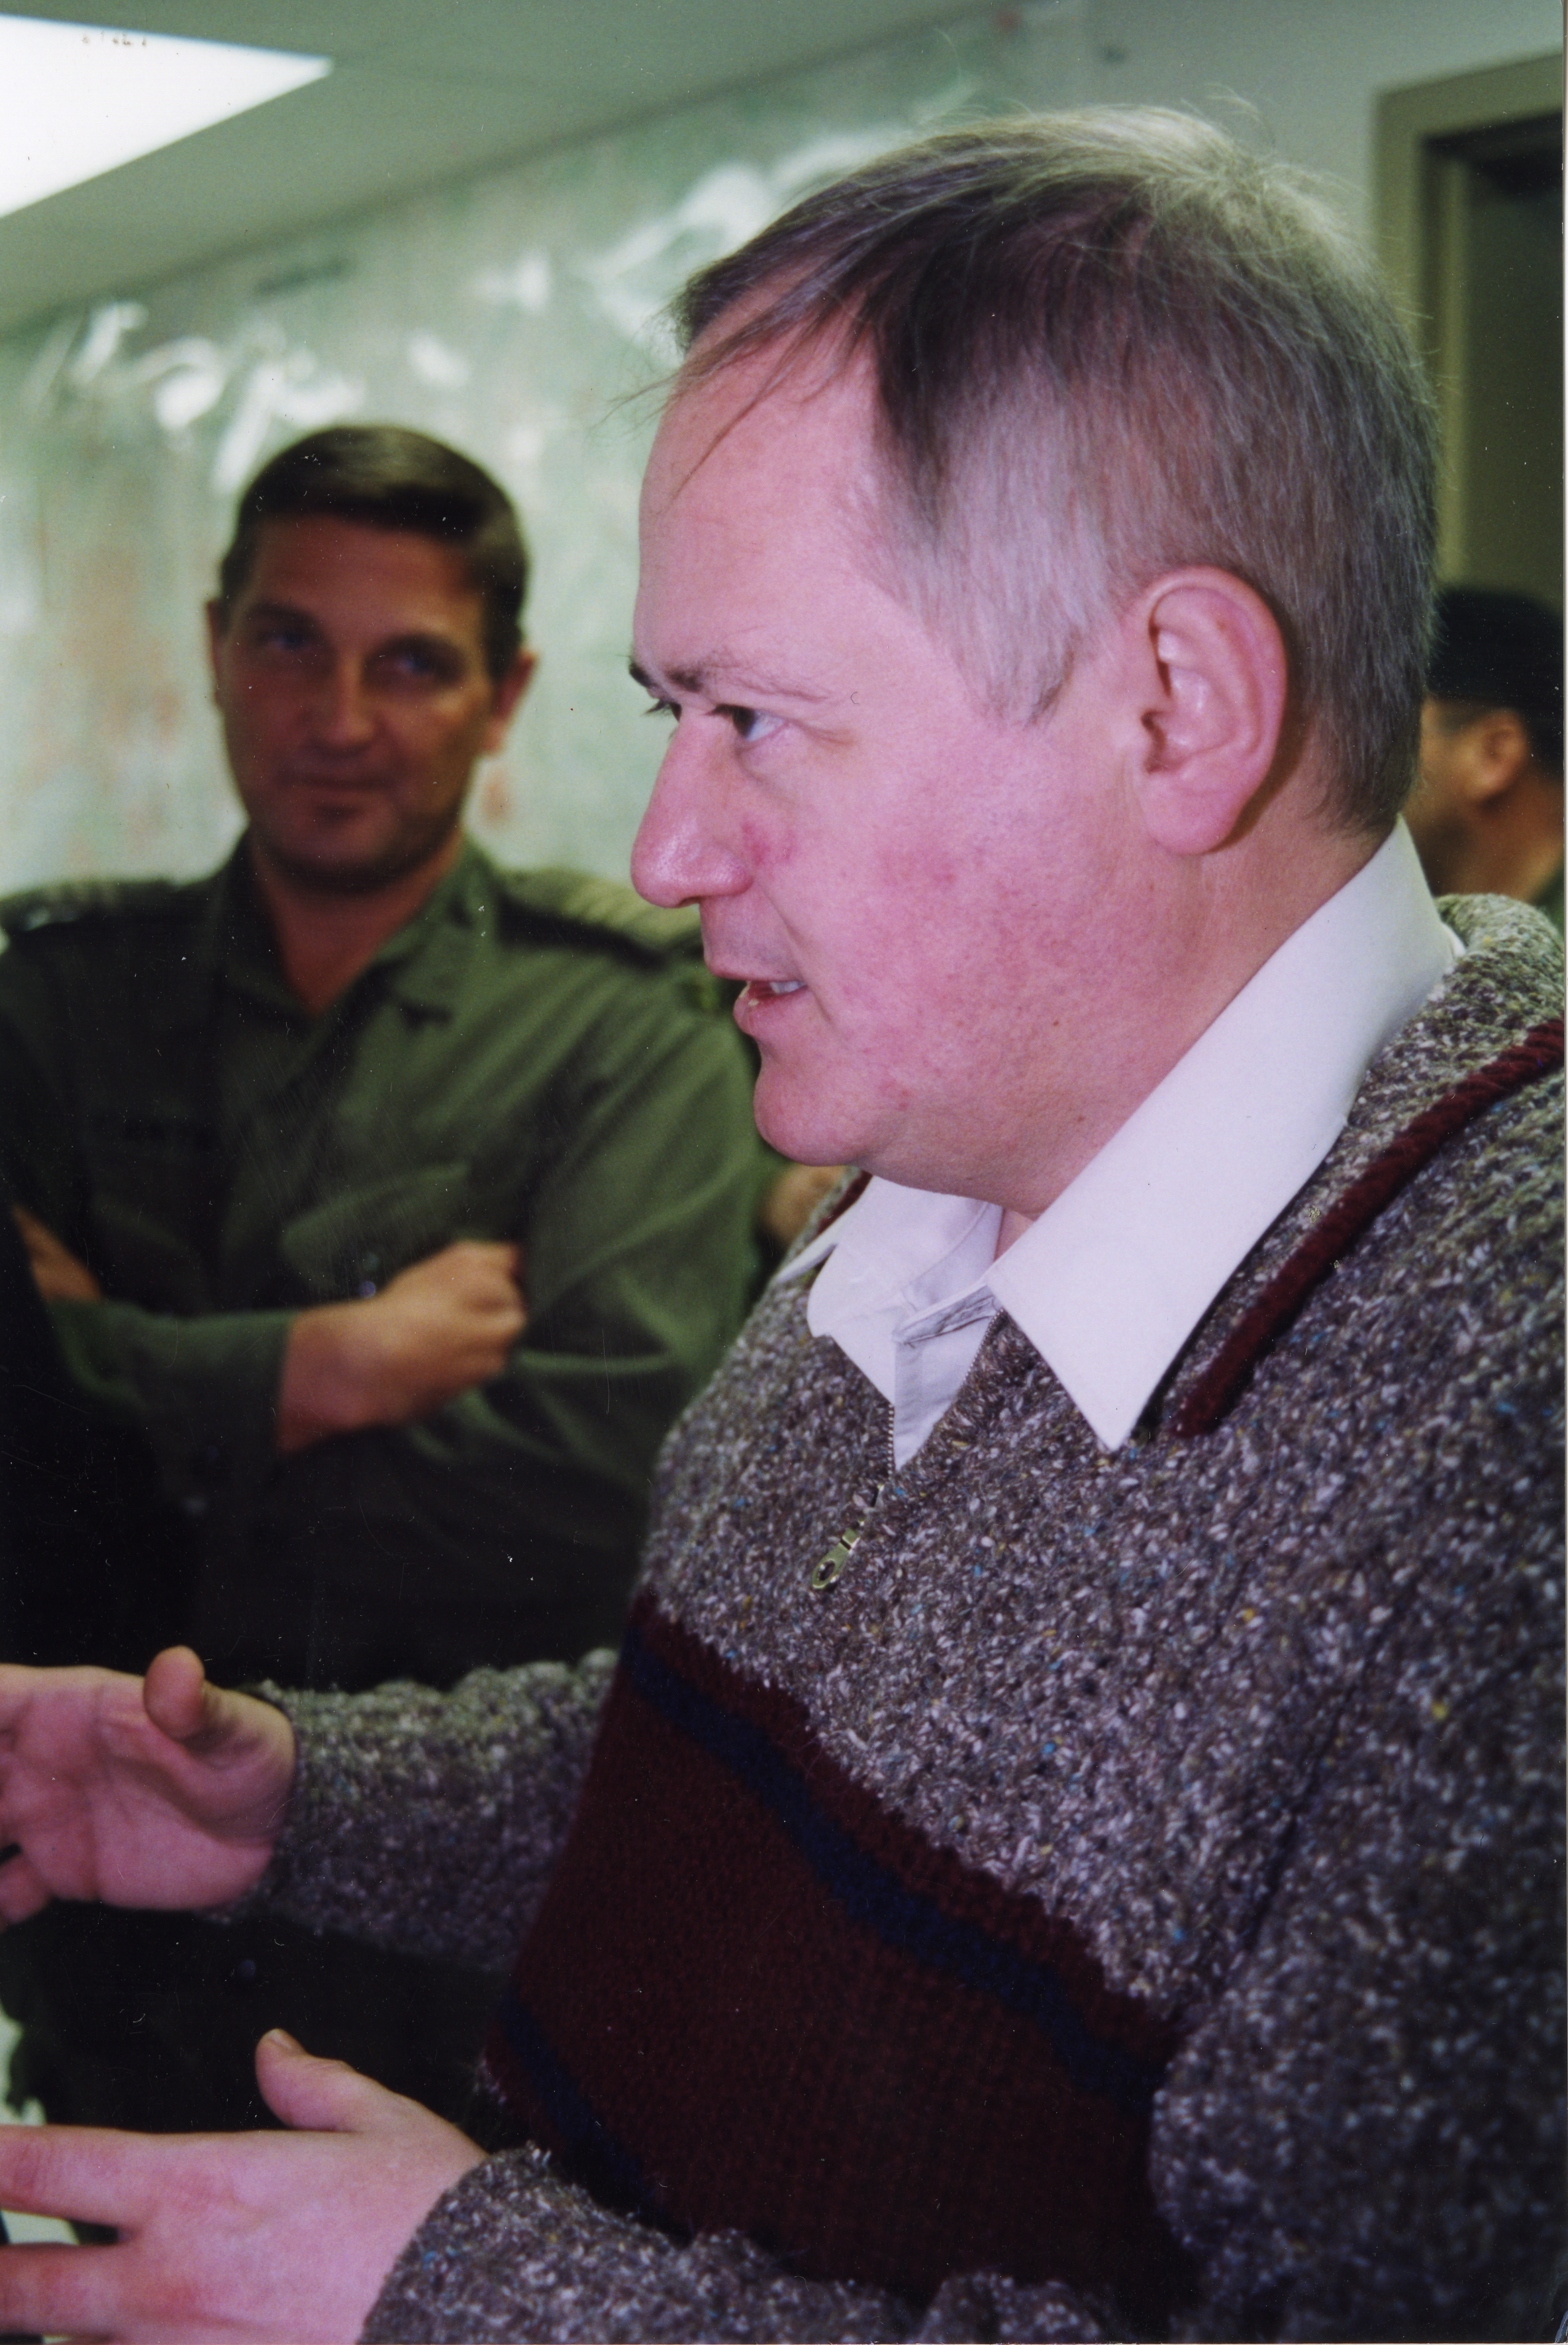 The Mayor of Saint-Jean, Myroslaw Smereka, discussing with militants.